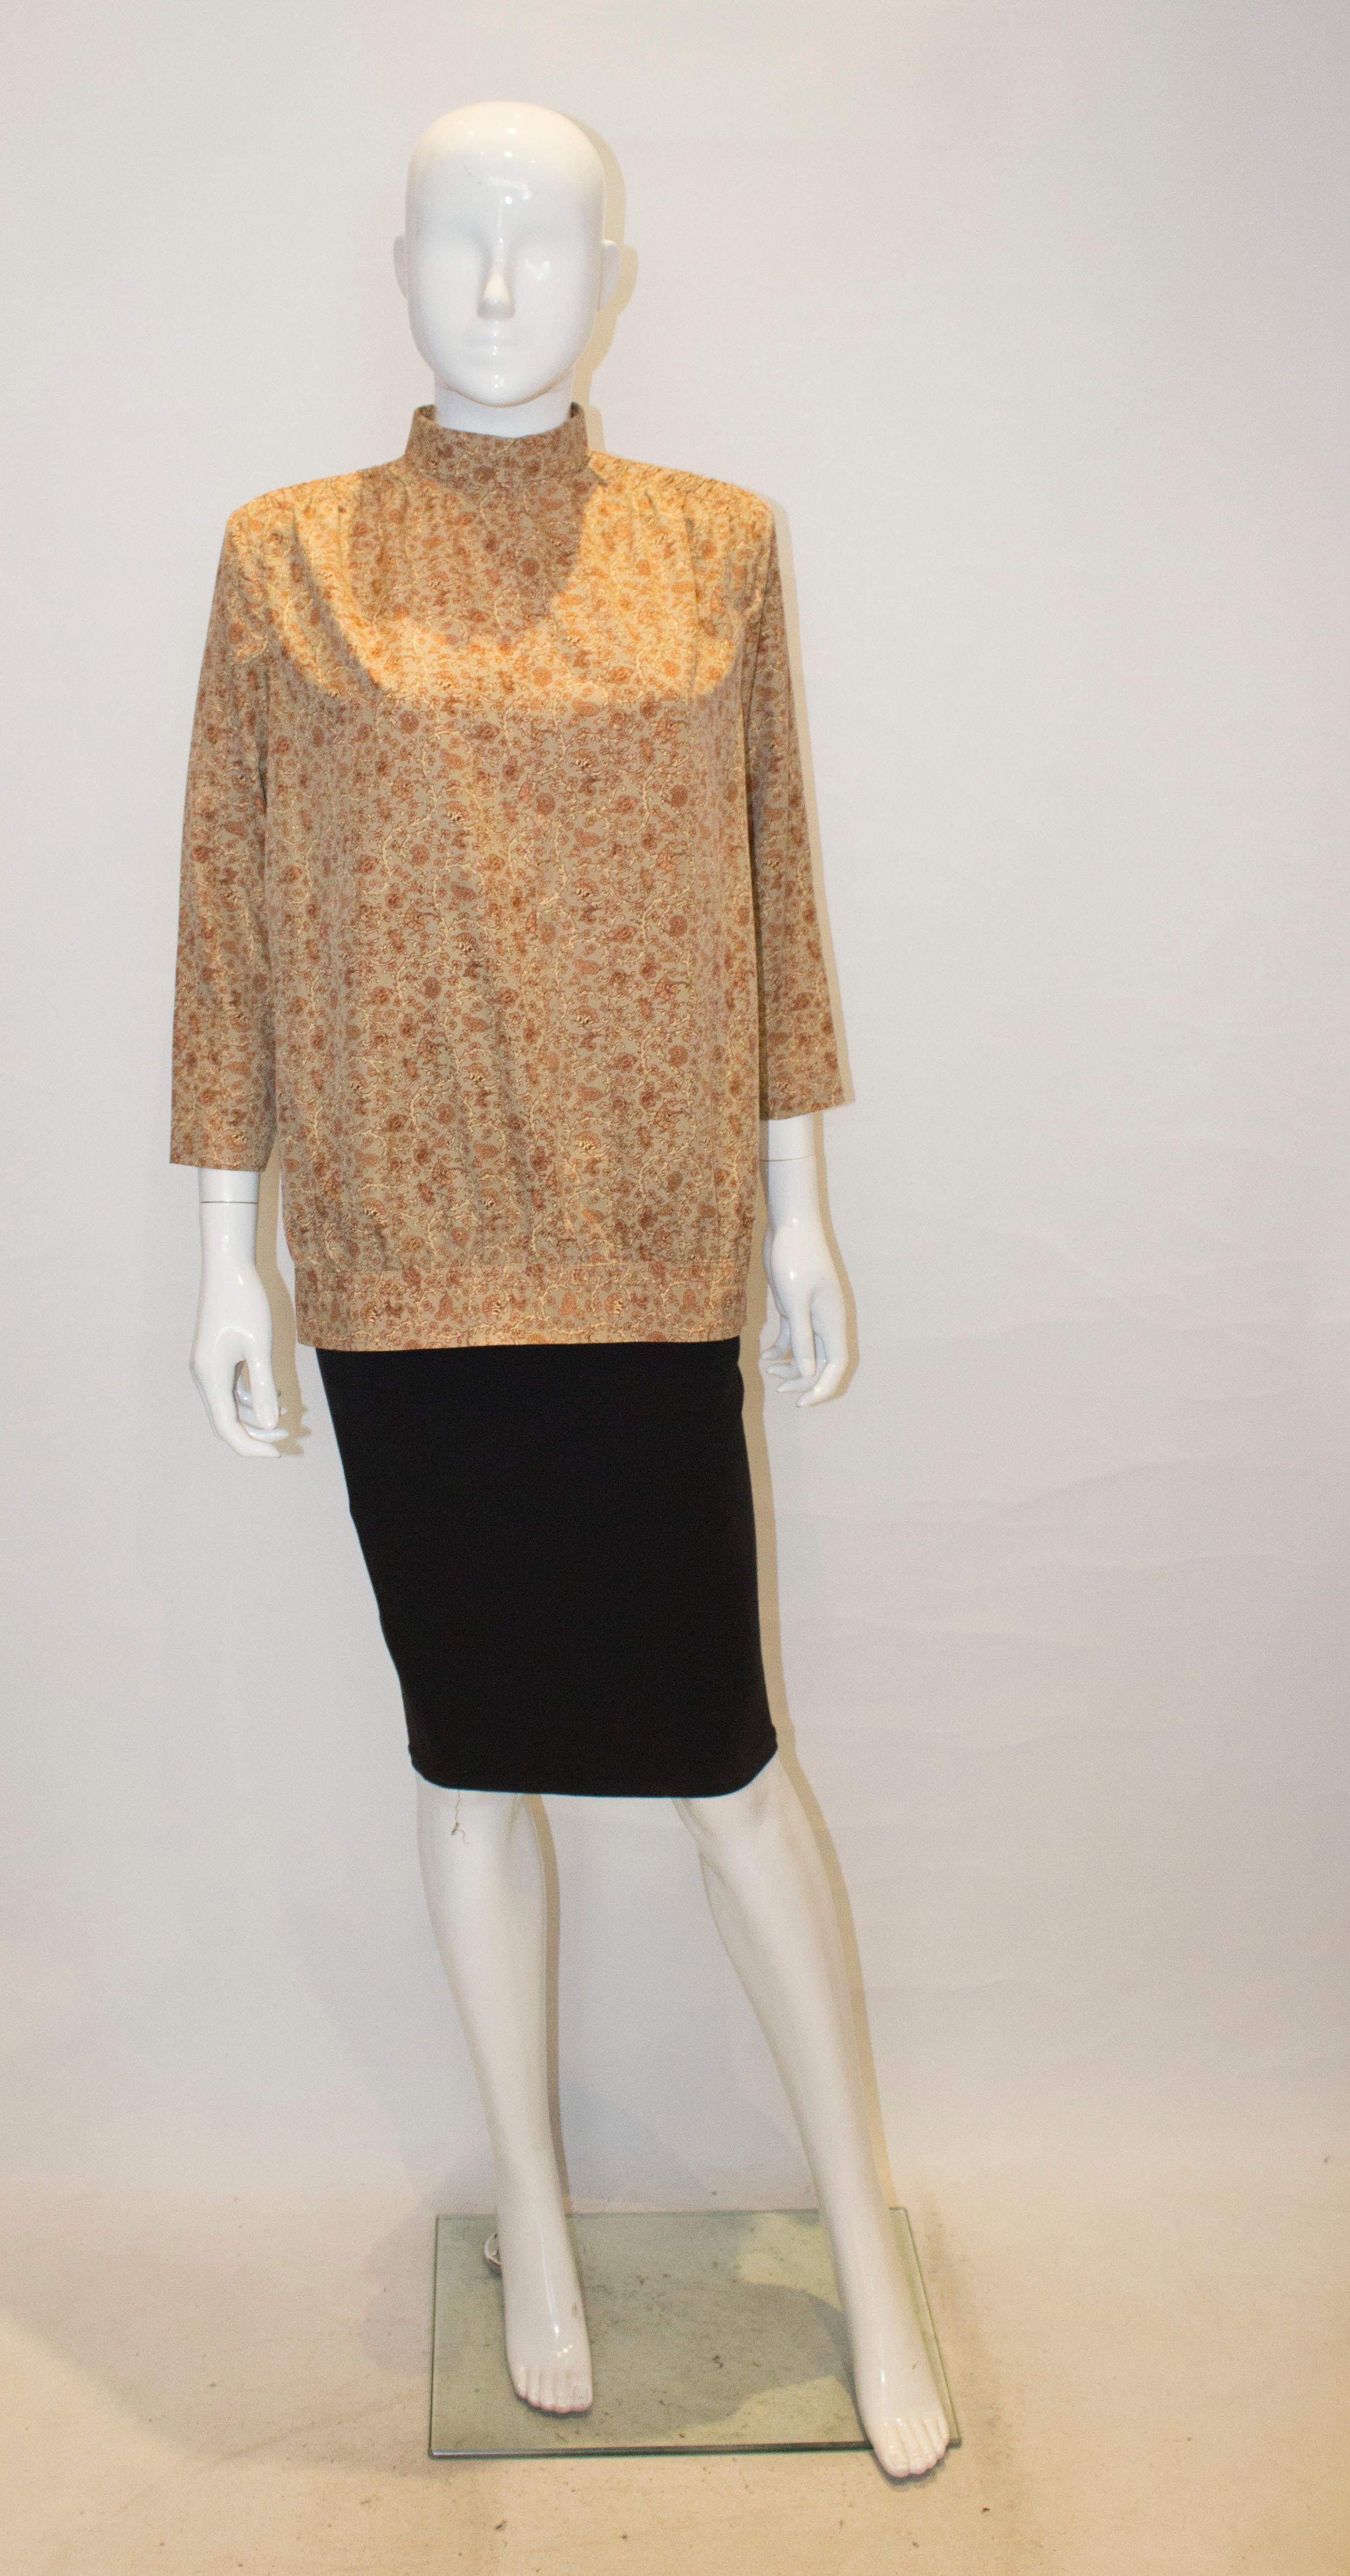 A pretty vintage kossak style blouse, in a brown floral fabric. The top has smoking detail on the shoulders , and a hook and eye fastening at the back.